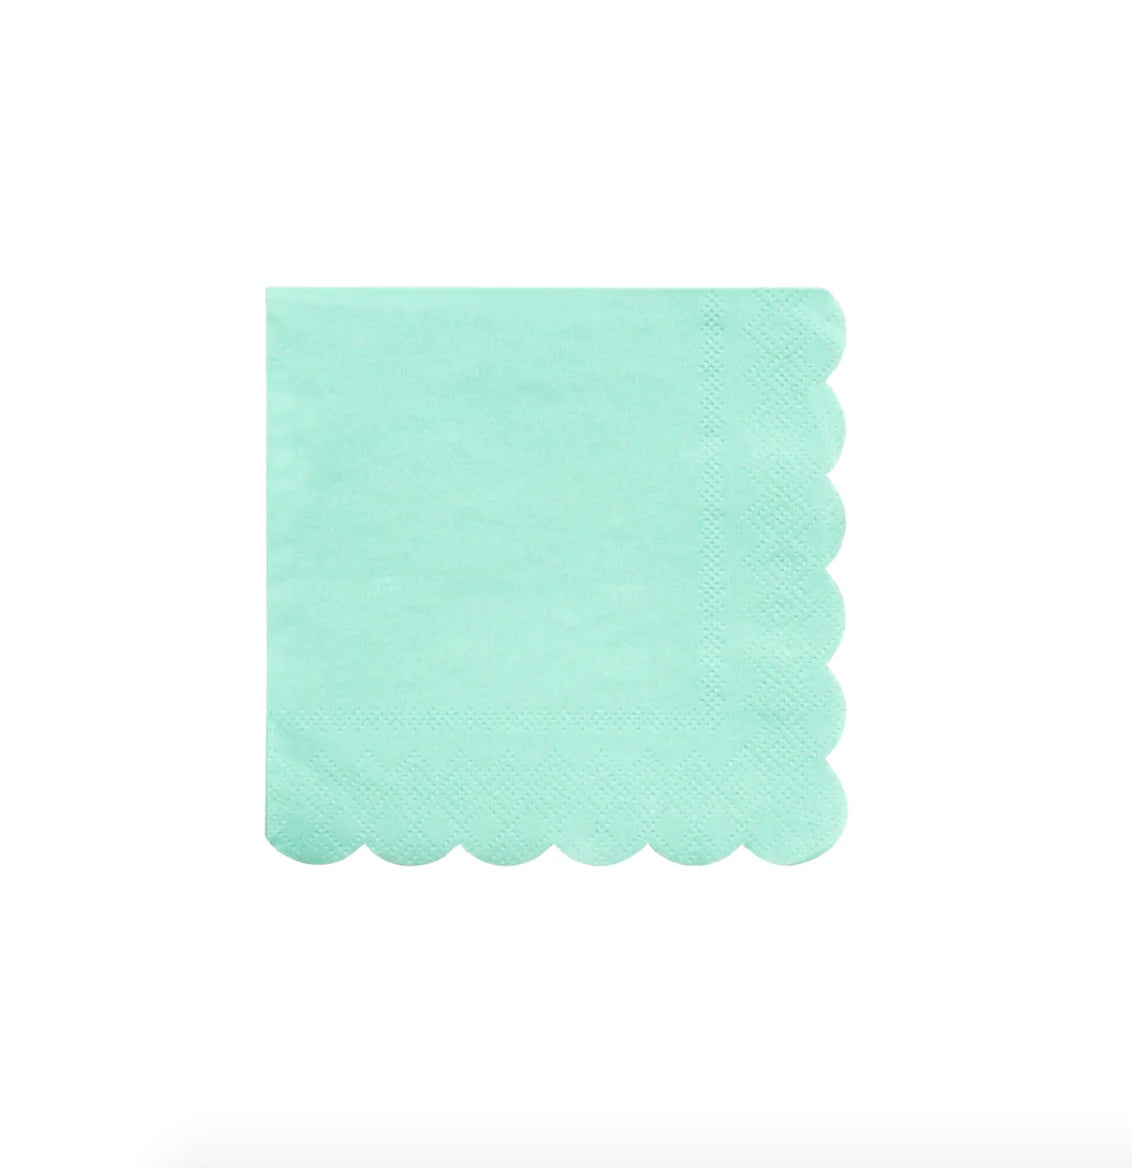 small mint napkin with scalloped edge